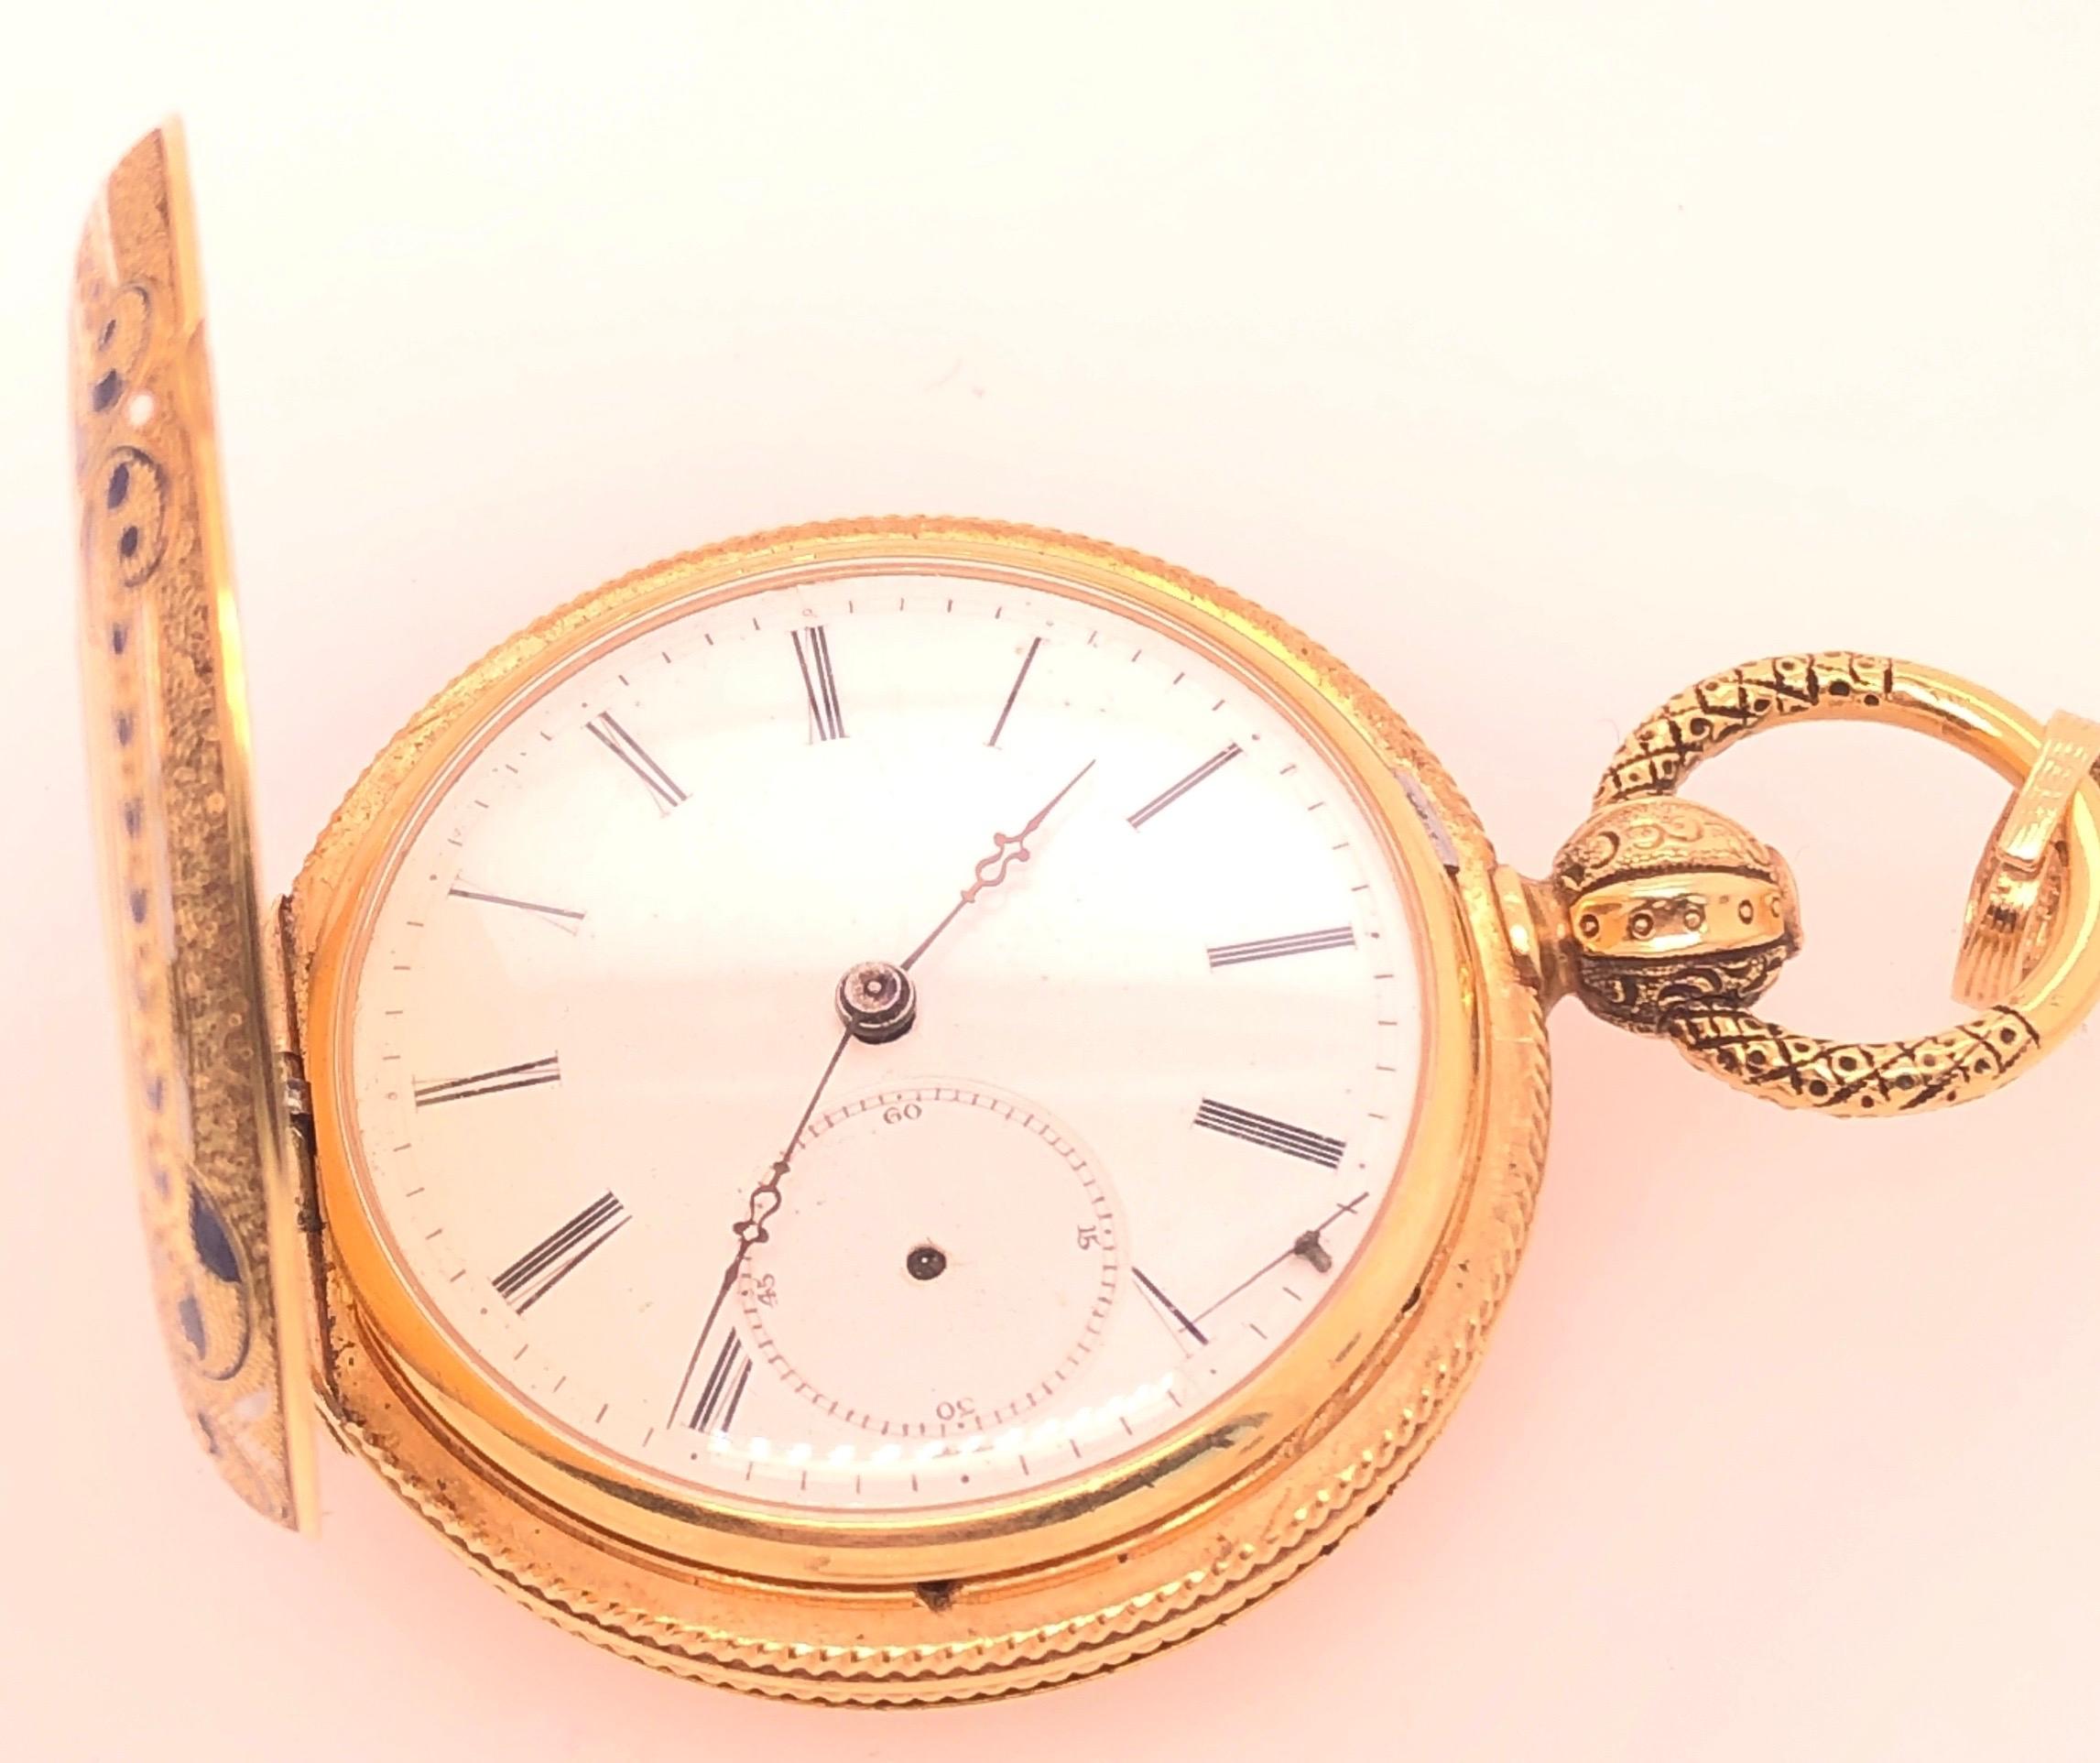 18 Karat Yellow Gold Antique Breguet Paris Pocket Watch with Porcelain Dial.
Second hand missing This watch does not work. 